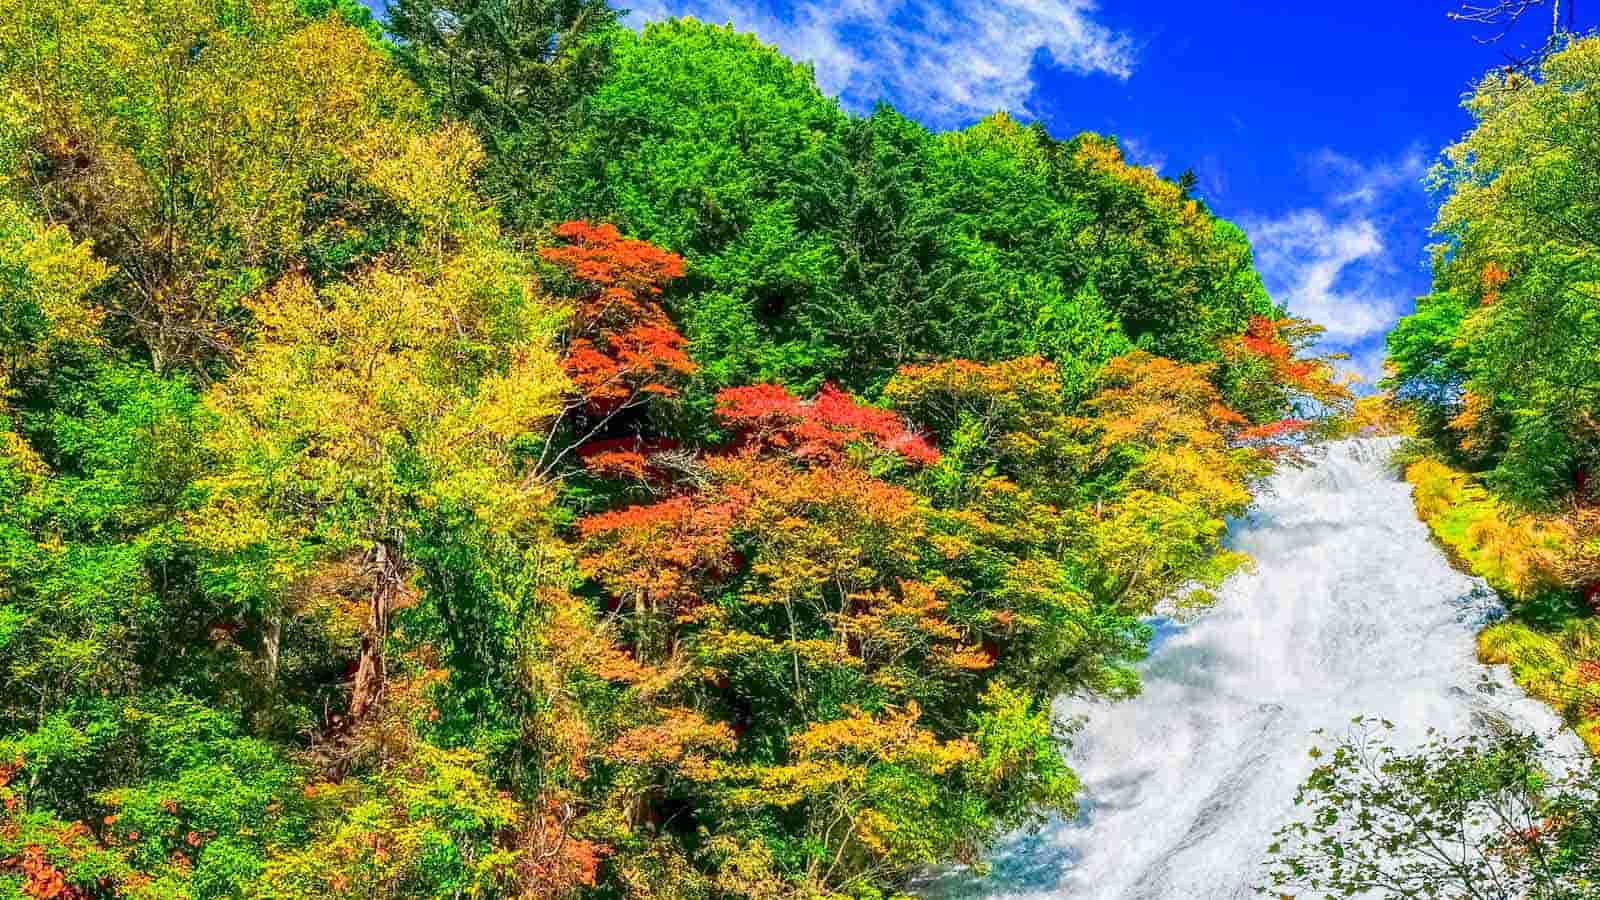 Autumn Colors in Nikko: 12 Places that will Take Your Breath